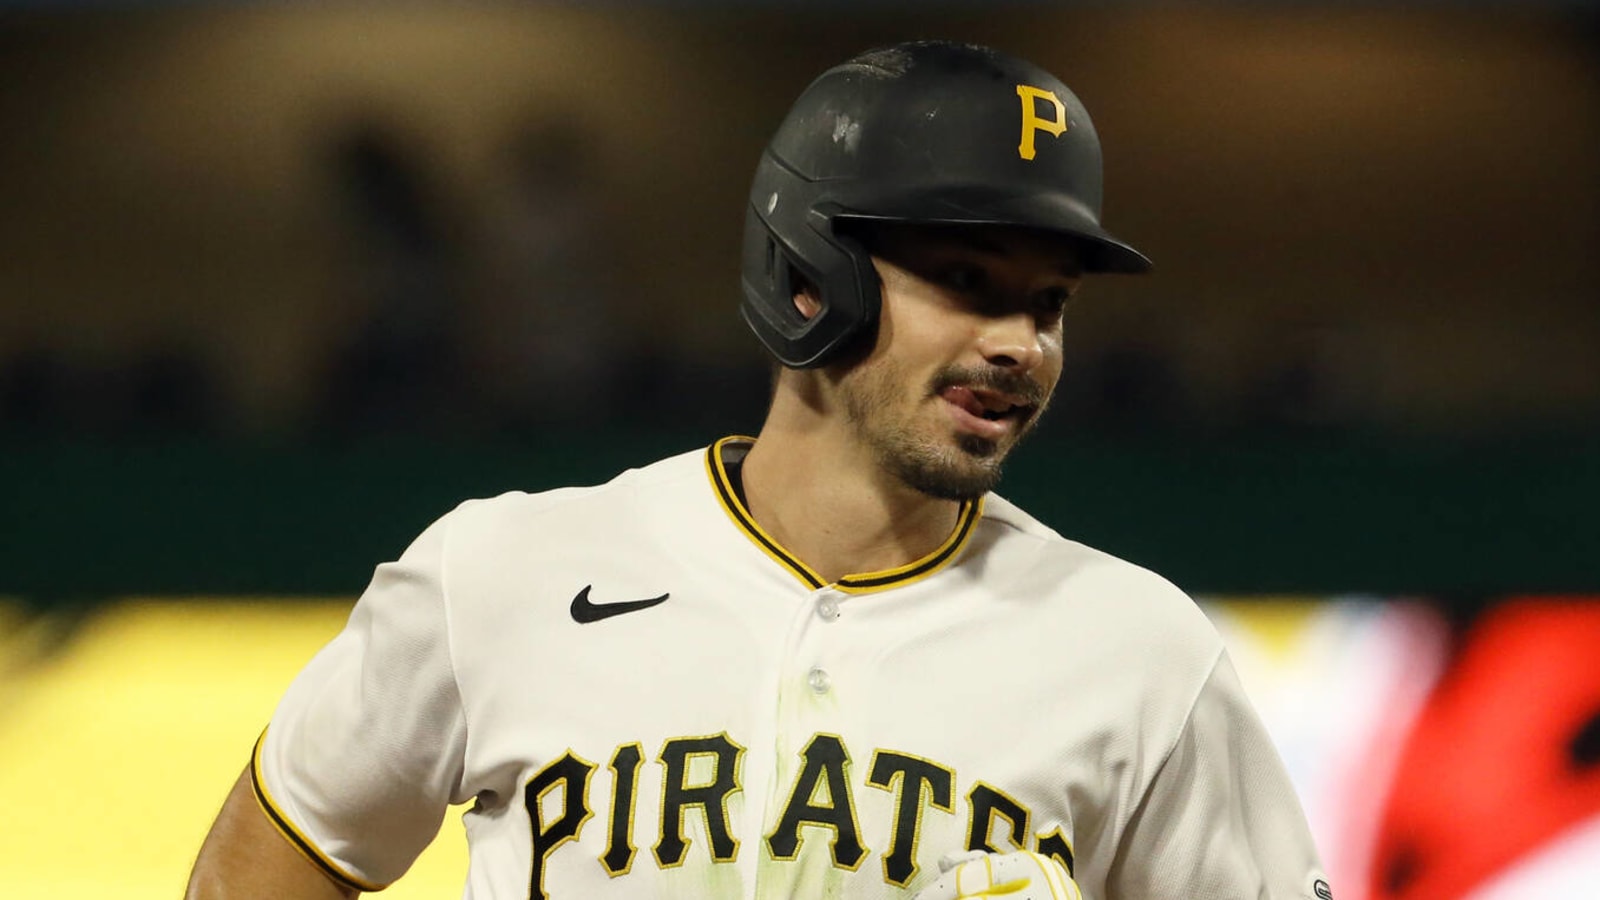 Report: Bryan Reynolds, Pirates expected to resume contract extension talks